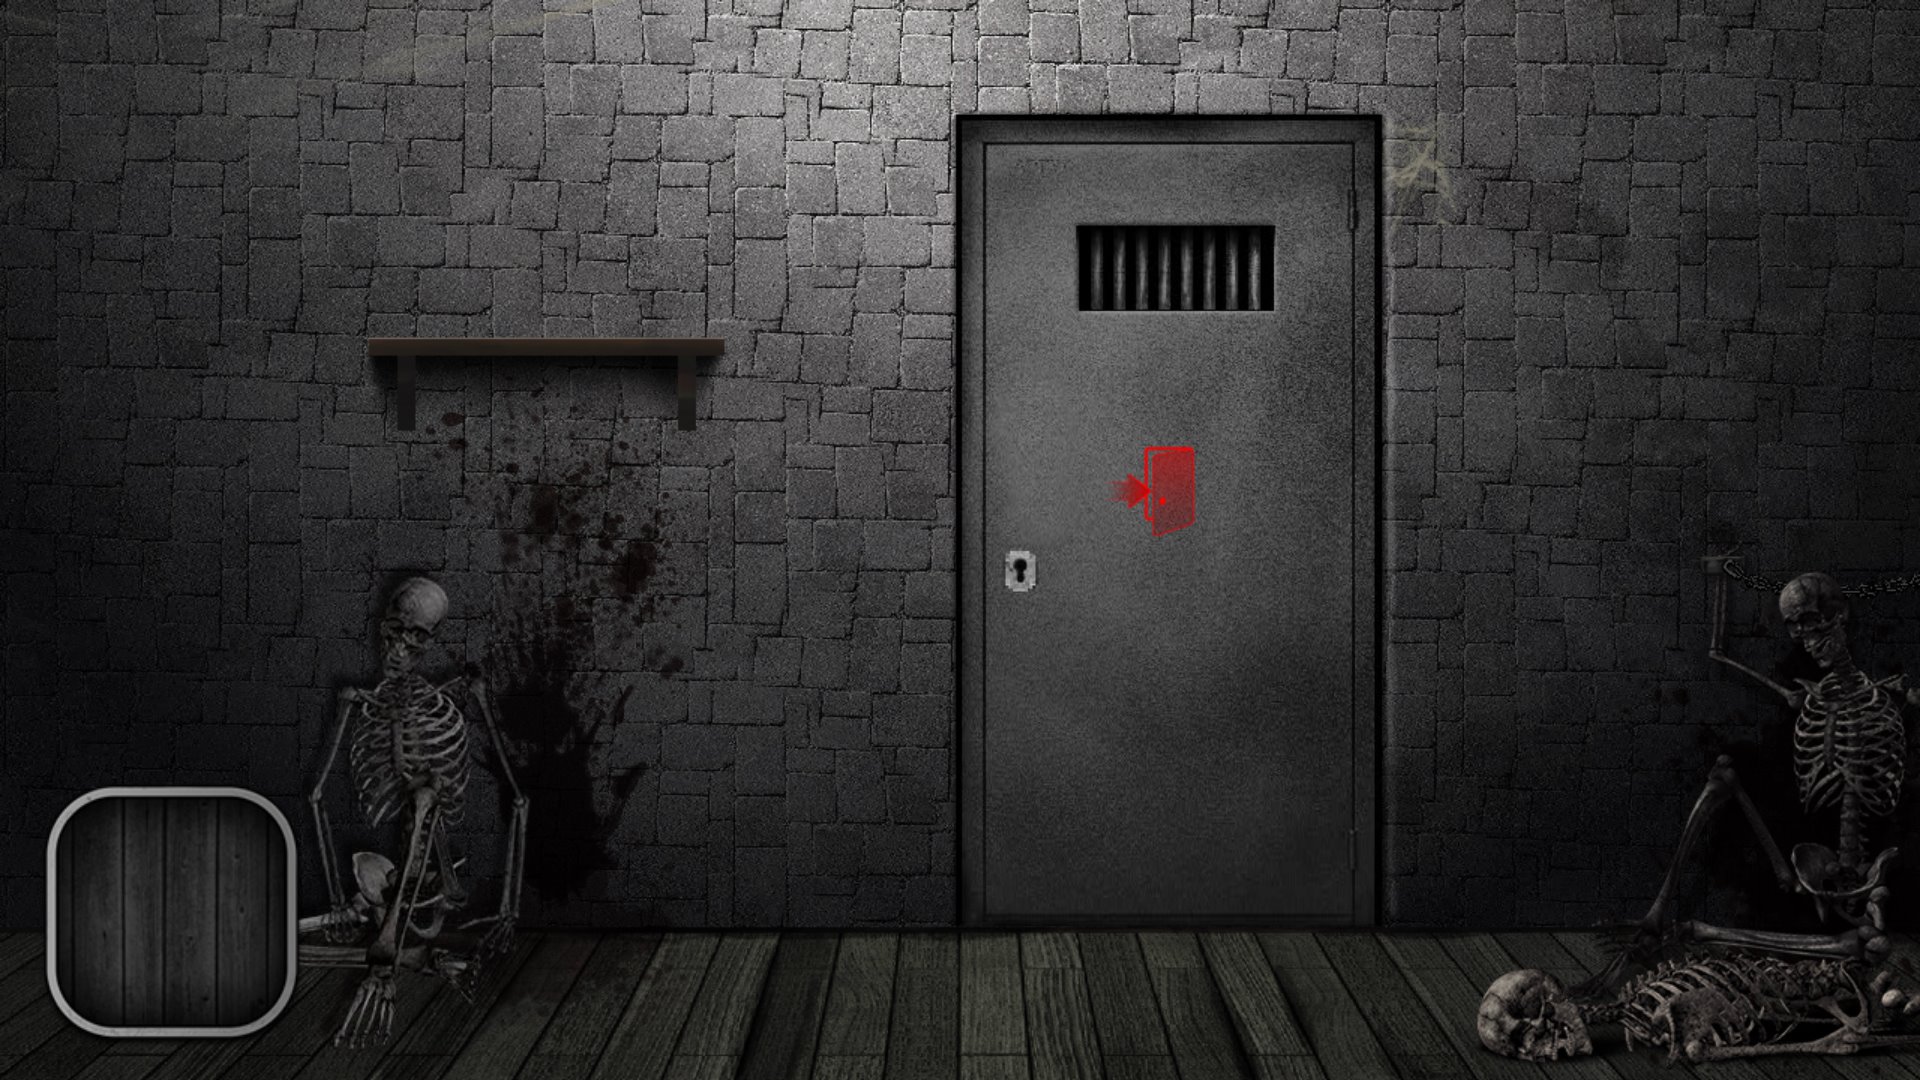 Escape room android. Escape Fear House дом страха - побег. Дом страха побег 2. House Escape игра про побег.